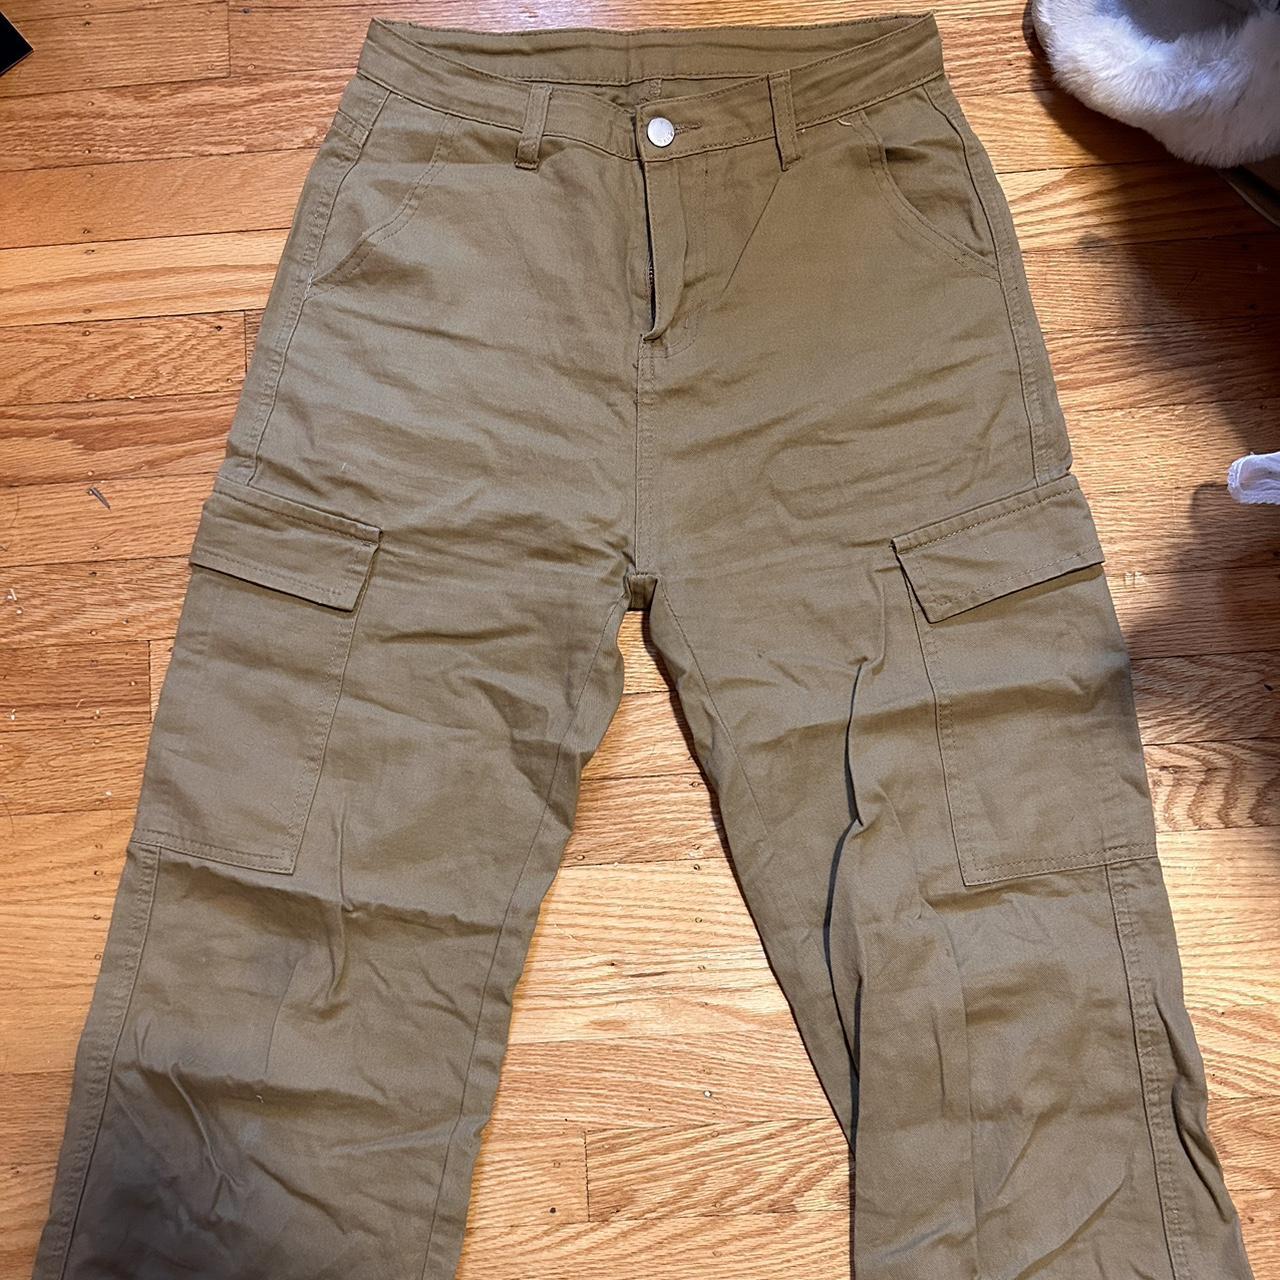 Tan Cargo Pants with Grunge Style